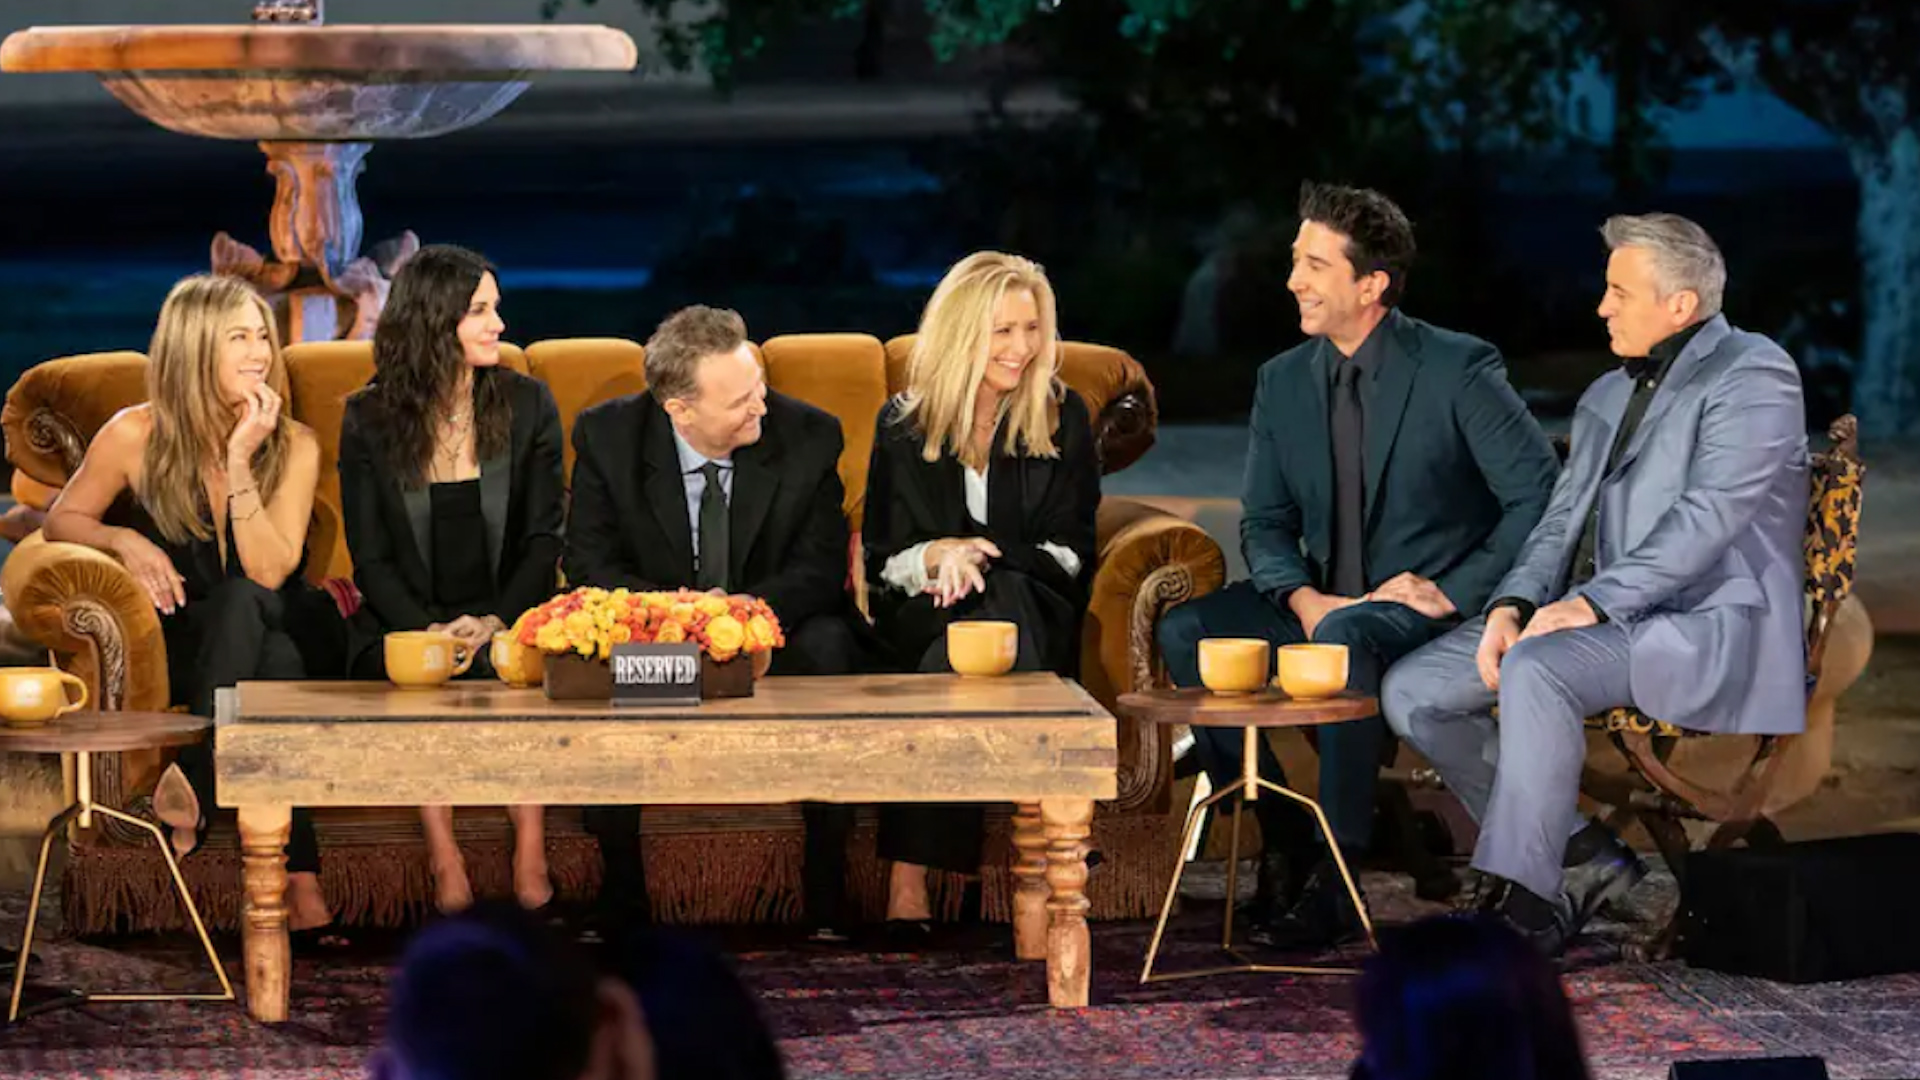 Friends reunion: Why the beloved Nineties sitcom has always mattered